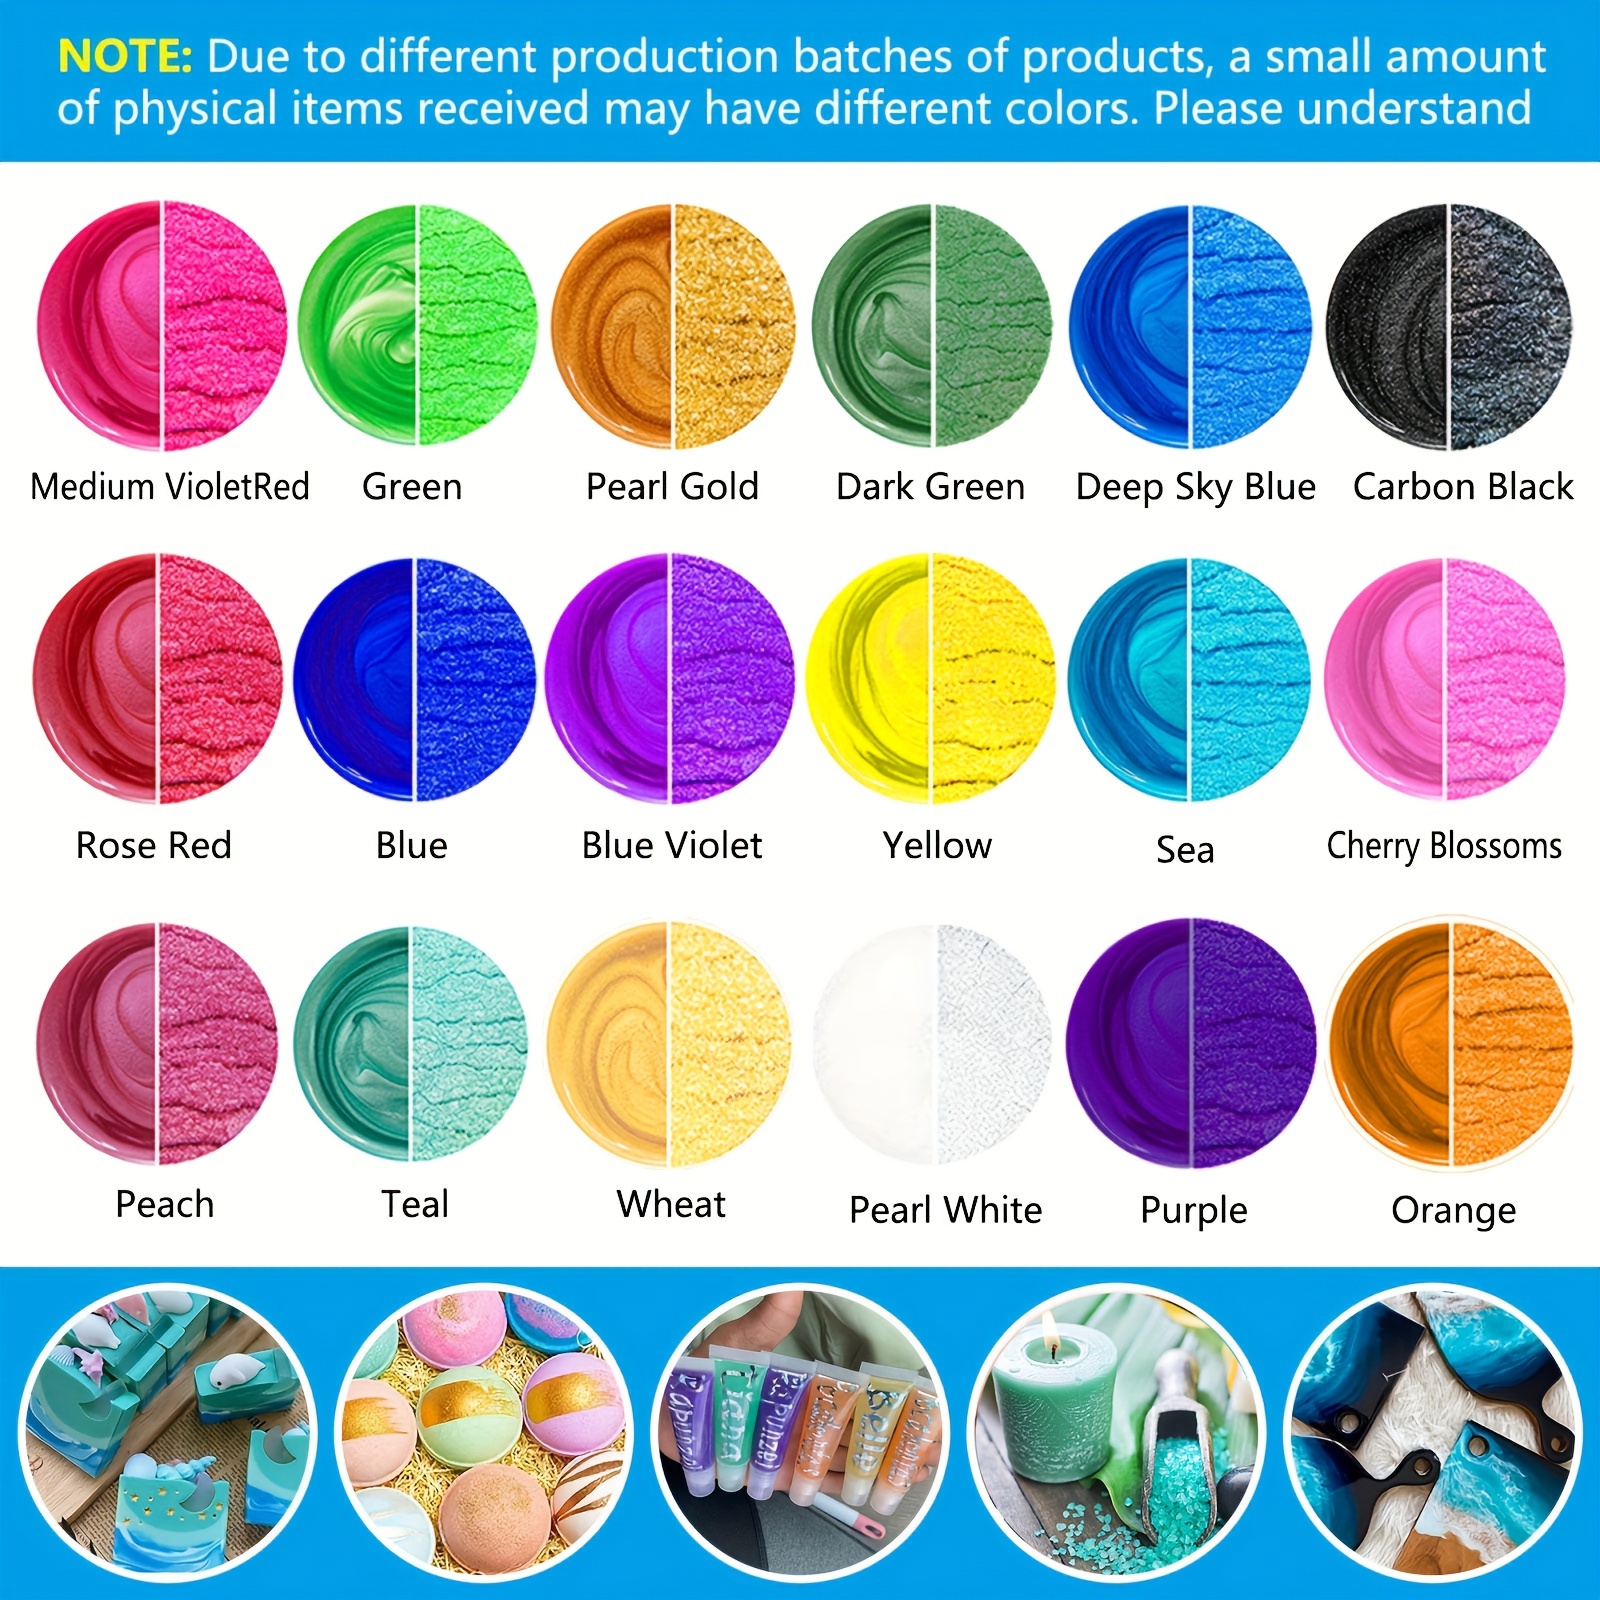 Mica Powder Pure - 3.5oz Pearl Epoxy Resin Color Pigment - Cosmetic Grade Slime Coloring Pigment - Natural Soap Dye for Soap Making Supplies Kit, Bath